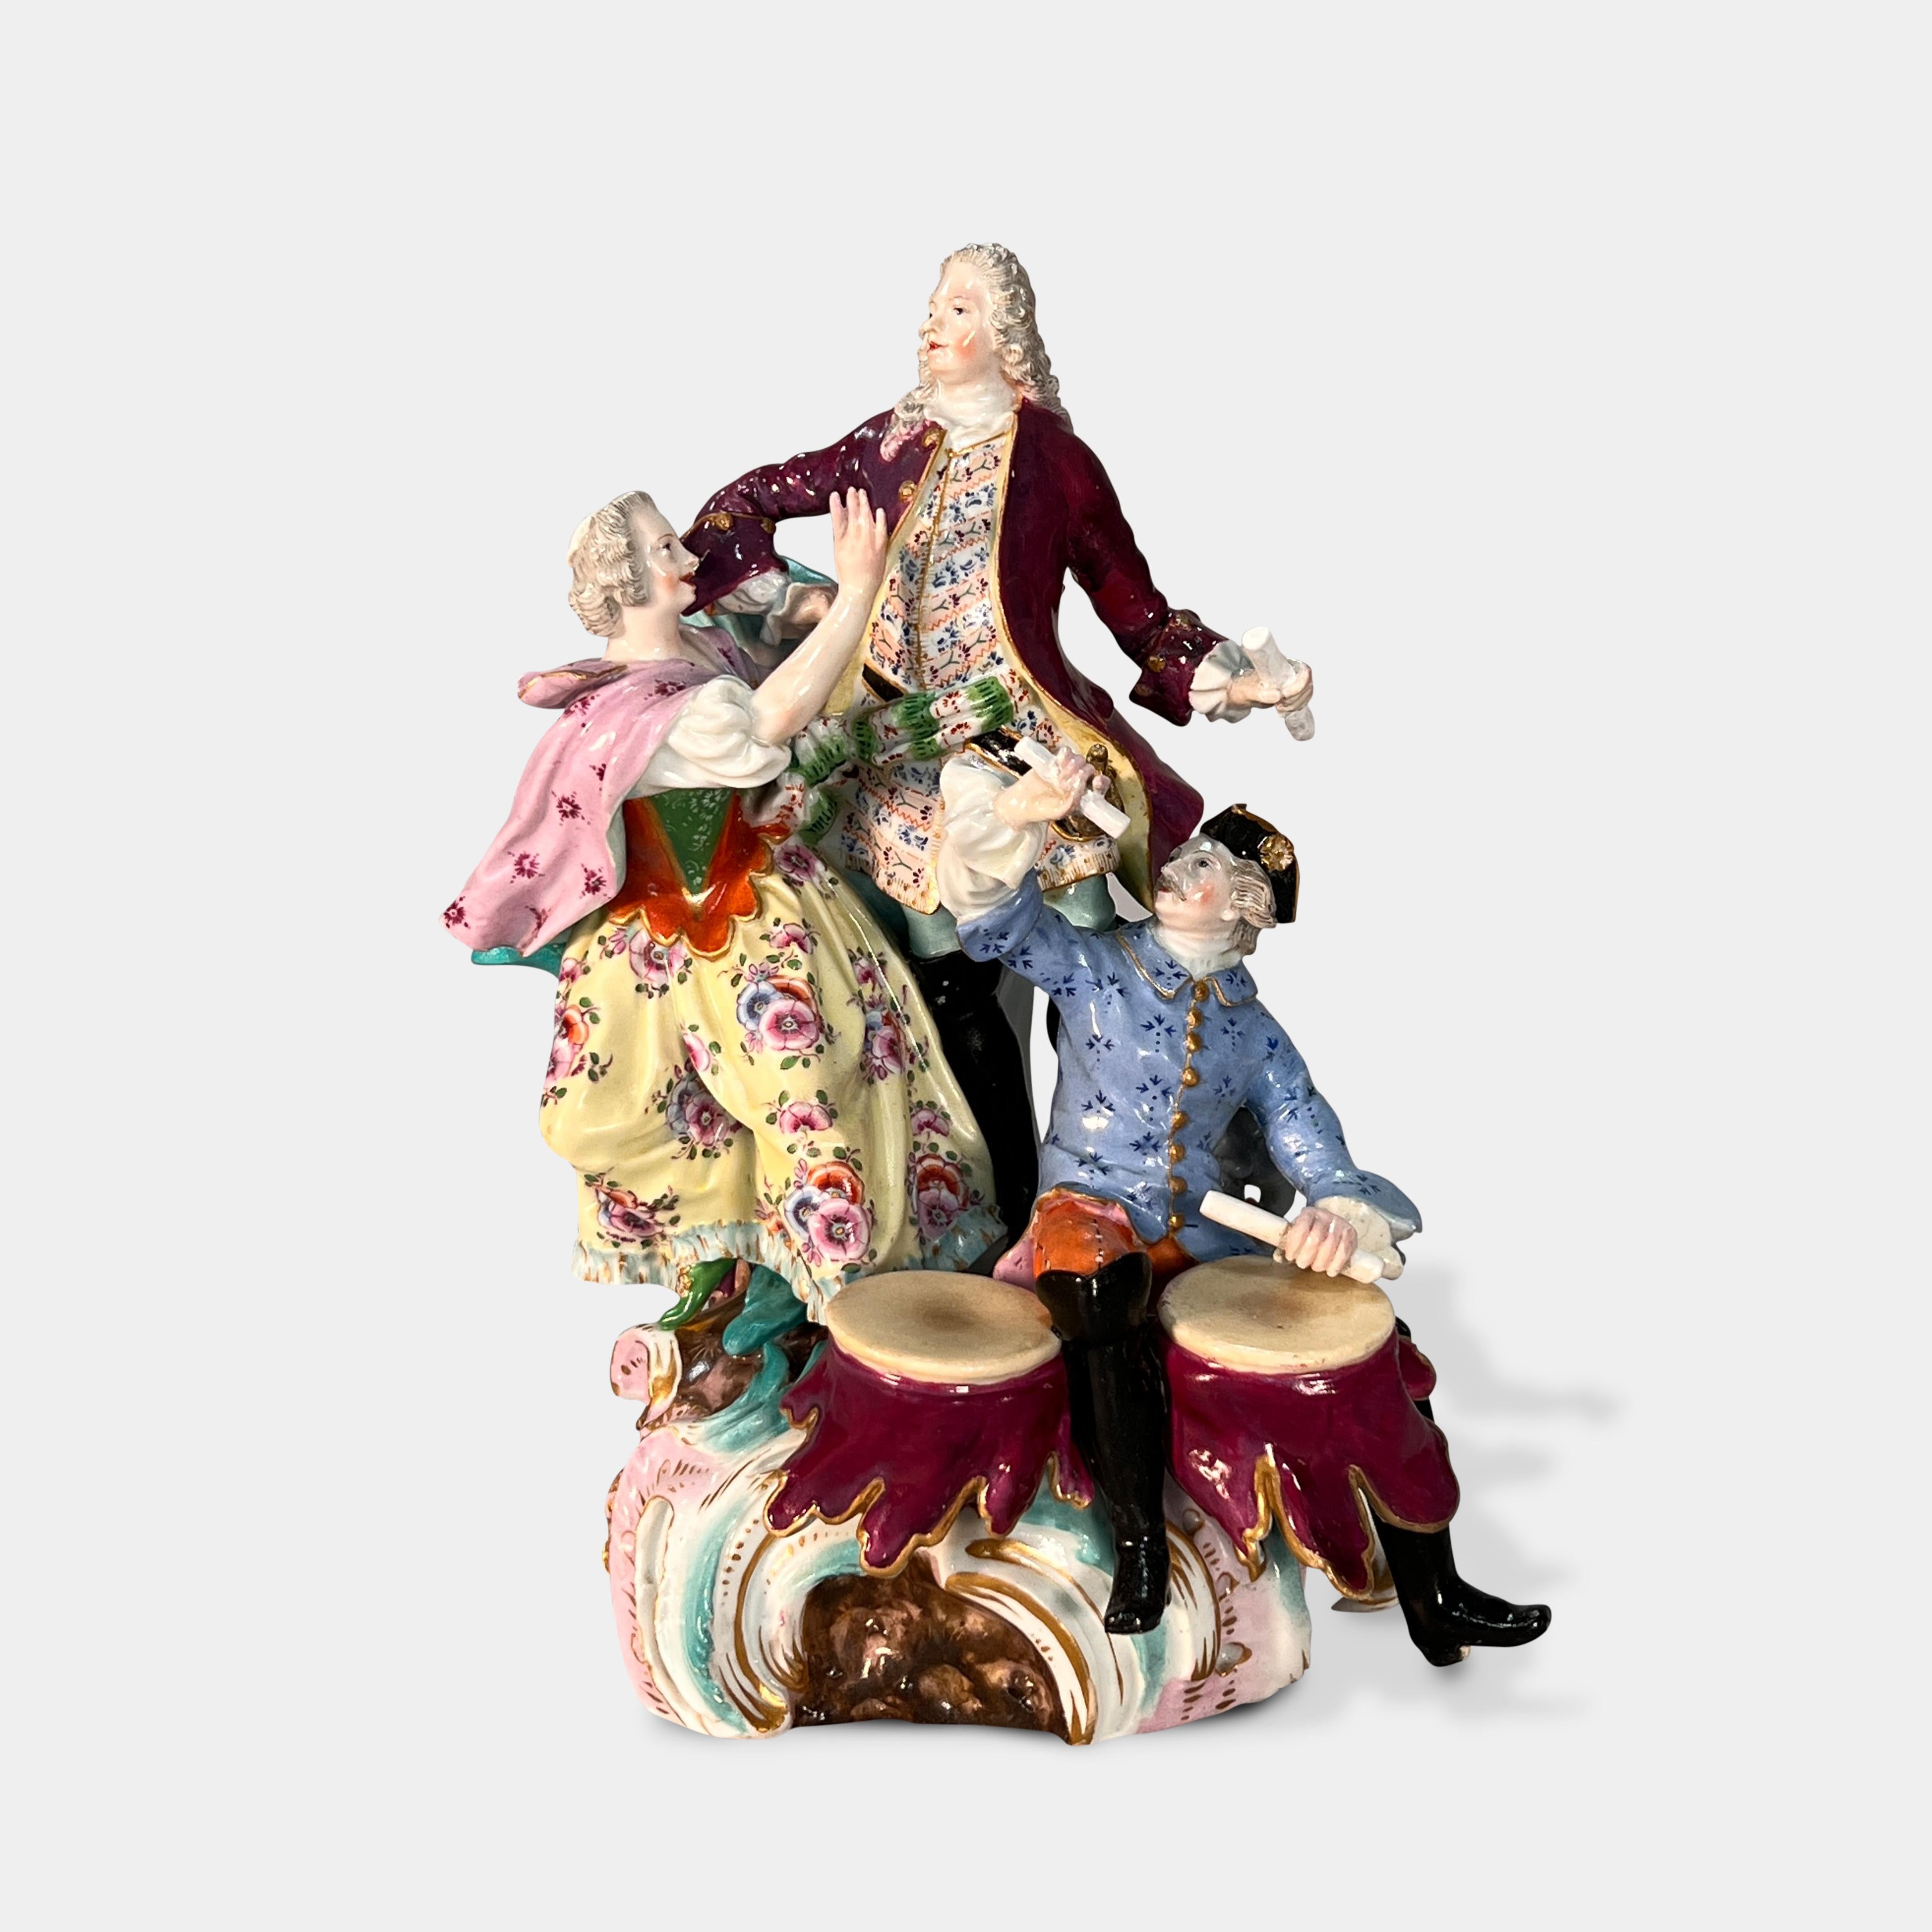 A lovely 19th century German Meissen porcelain figural group of a standing lady appealing to a standing gentleman and a musician sitting by their feet playing the drums.

Late 19th century.

Blue Meissen crossed sword mark